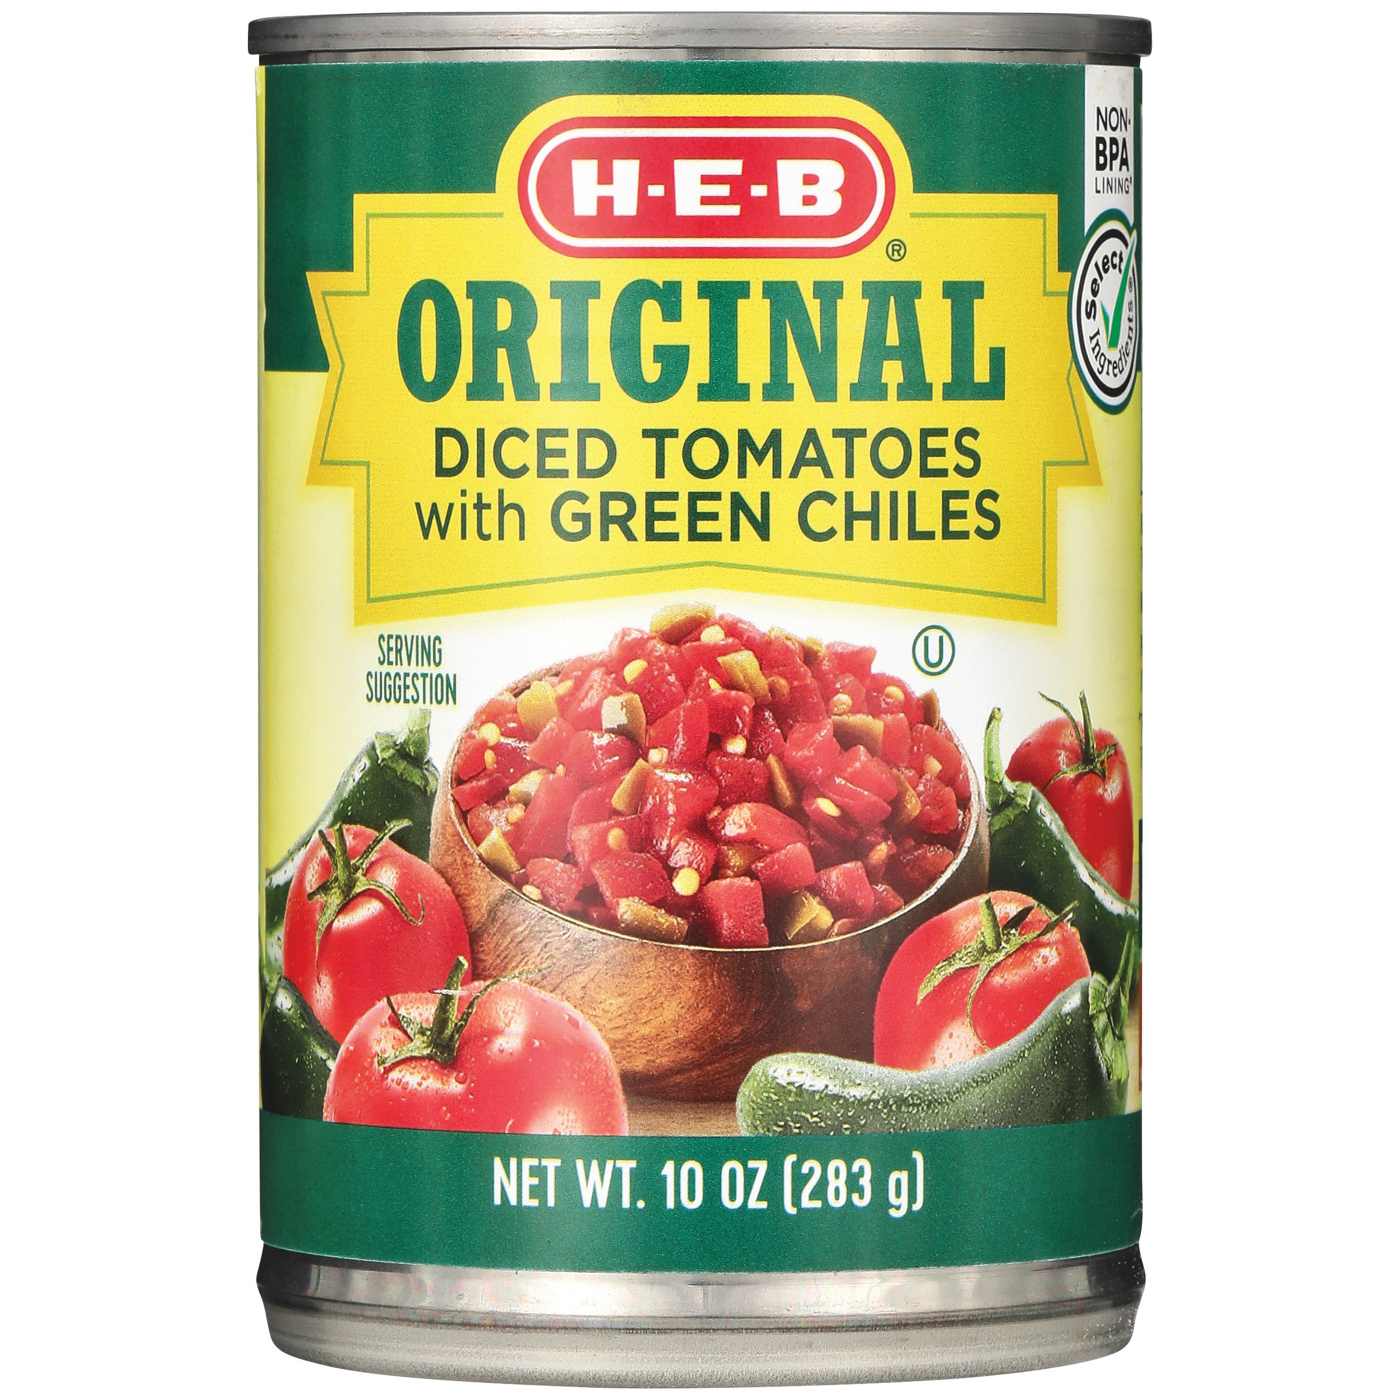 H-E-B Diced Tomatoes with Green Chiles - Original; image 1 of 2